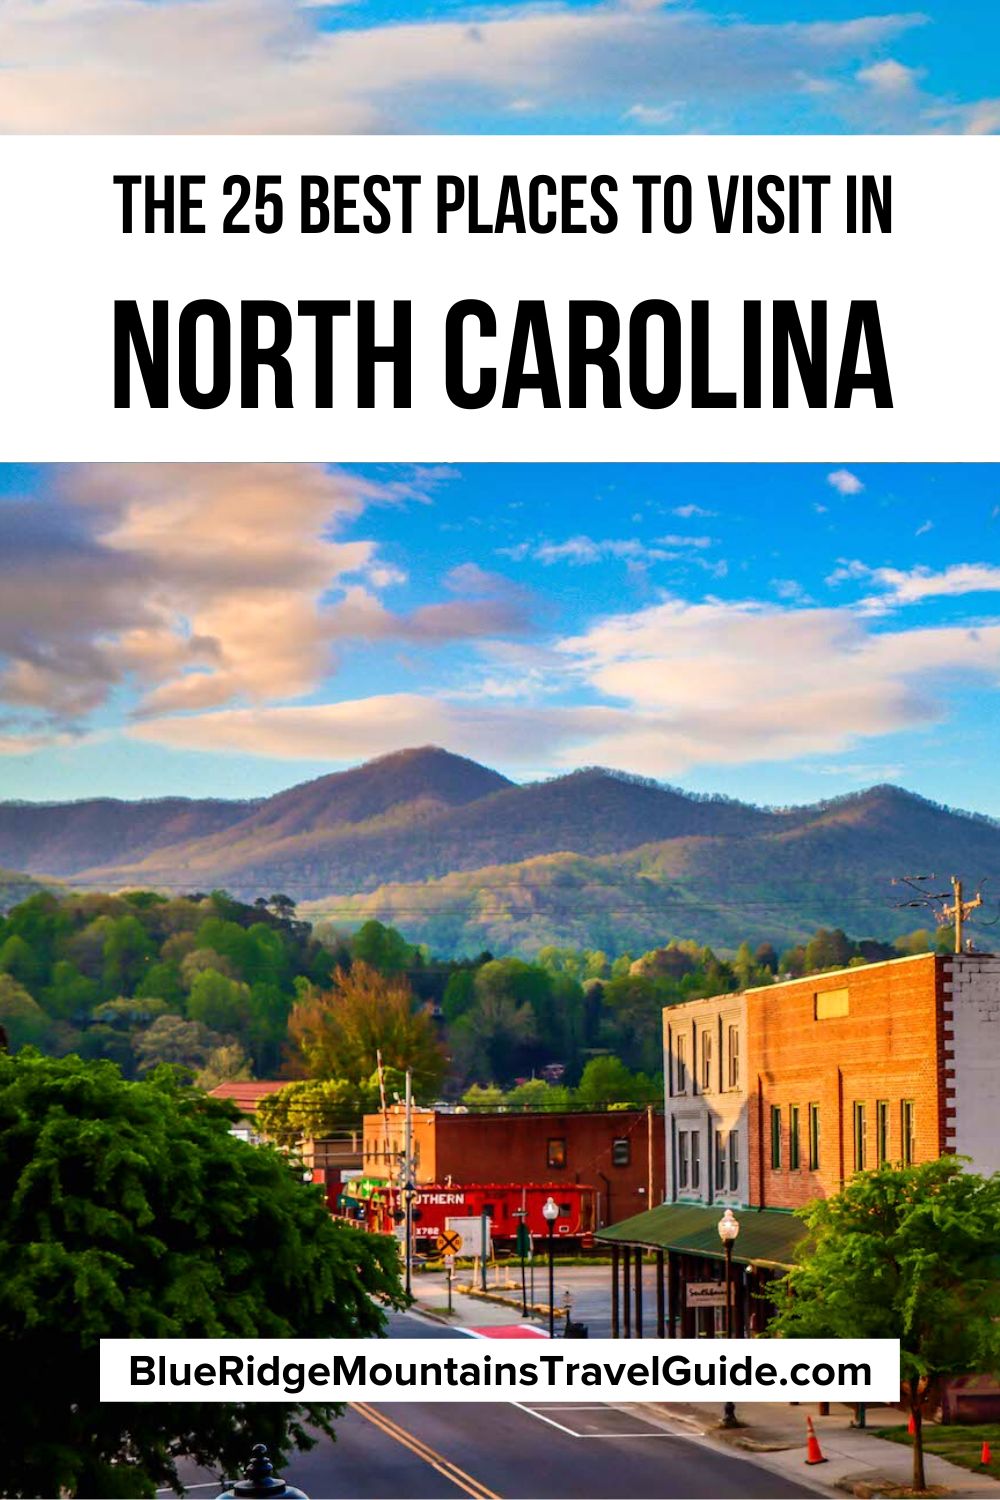 20 Best Things to Do in the Blue Ridge Mountains of North Carolina